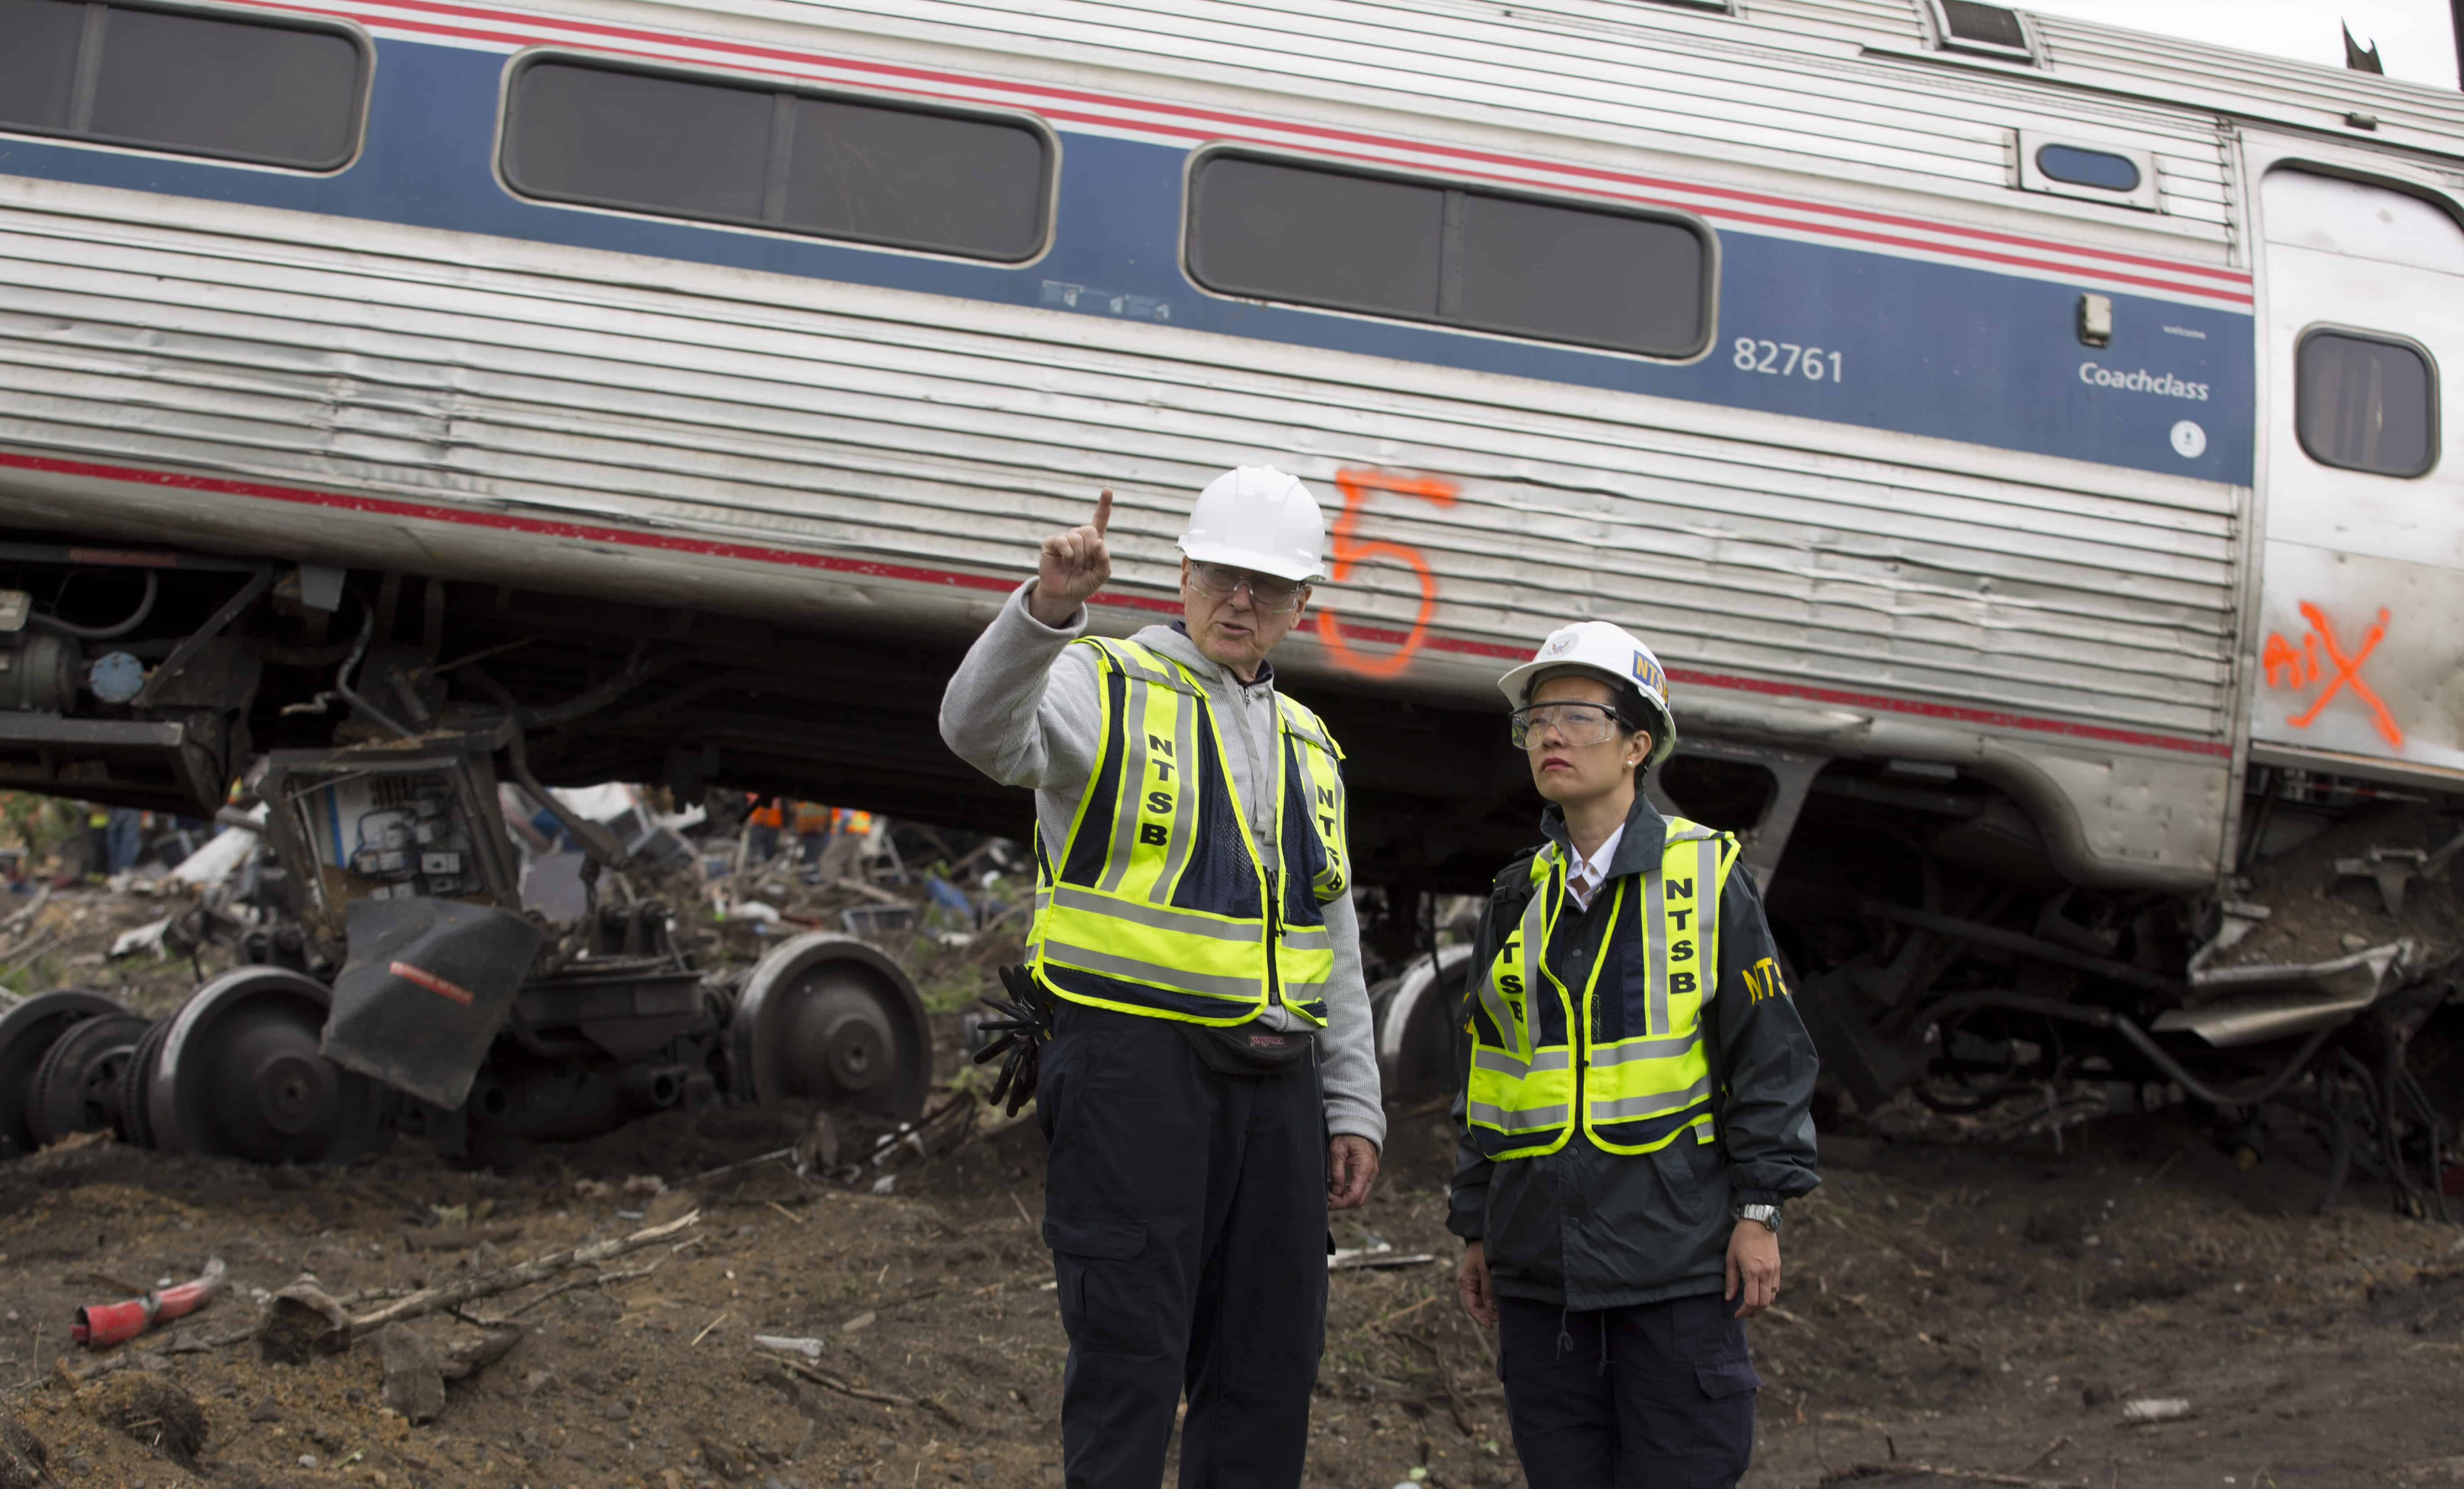 NTSB Rail Safety Investigator Mike Flanigon (left) briefs Vice Chairman Dinh-Zarr at the scene of an Amtrack train that derailed in Philadelphia, Penn., May 13, 2015.